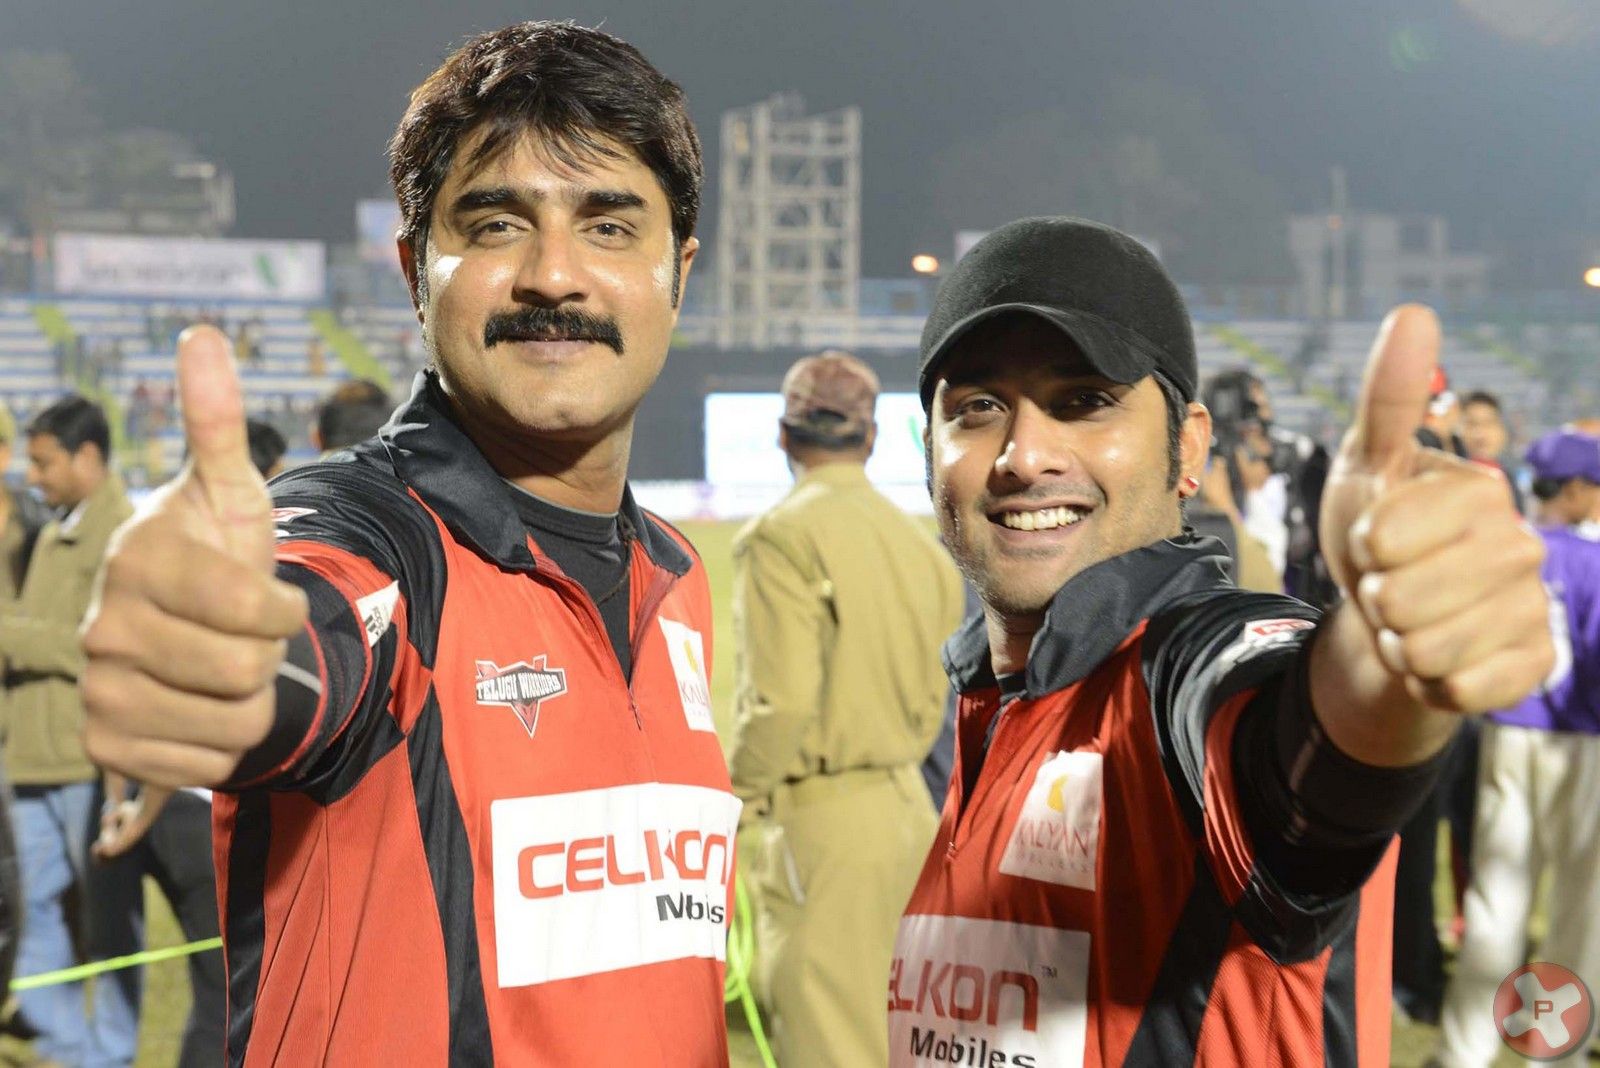 CCL Telugu Warriors vs Bengal Tigers Match Pictures | Picture 379770